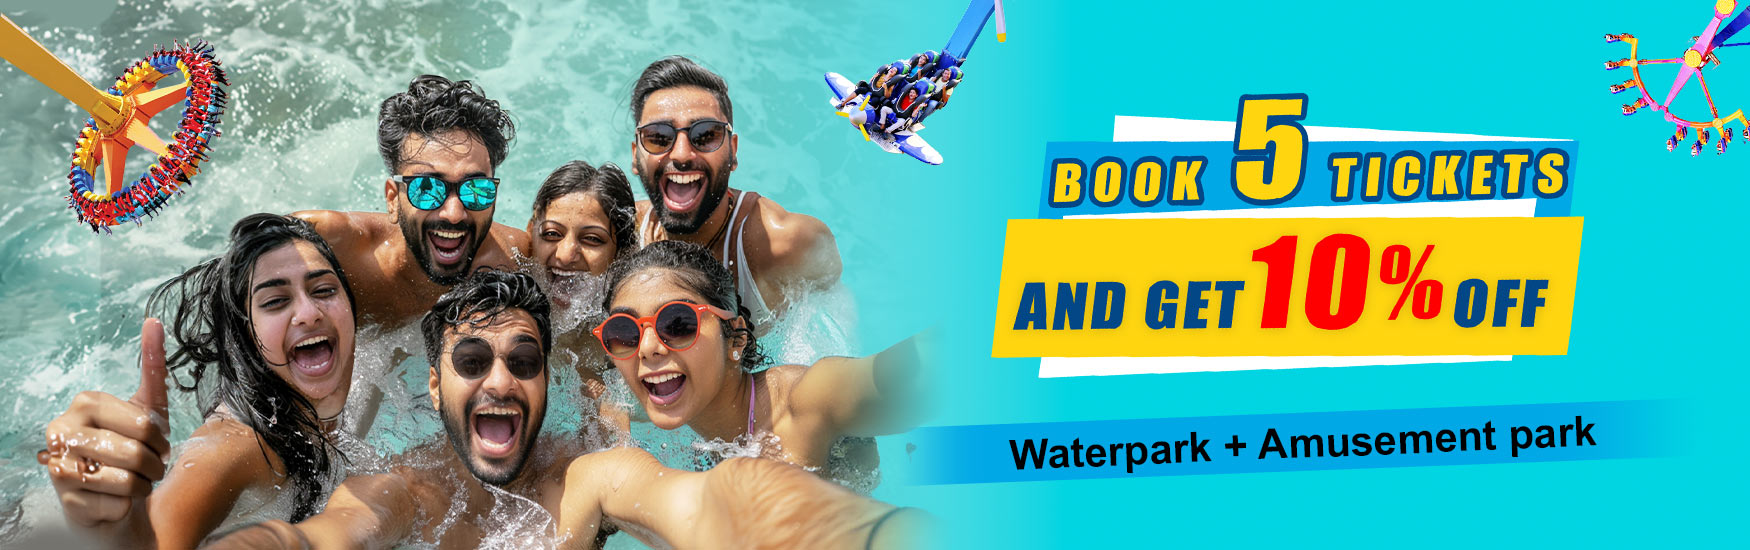 Book 5 or more tickets to Wet n Joy Lonavala and get 10% off the total price.